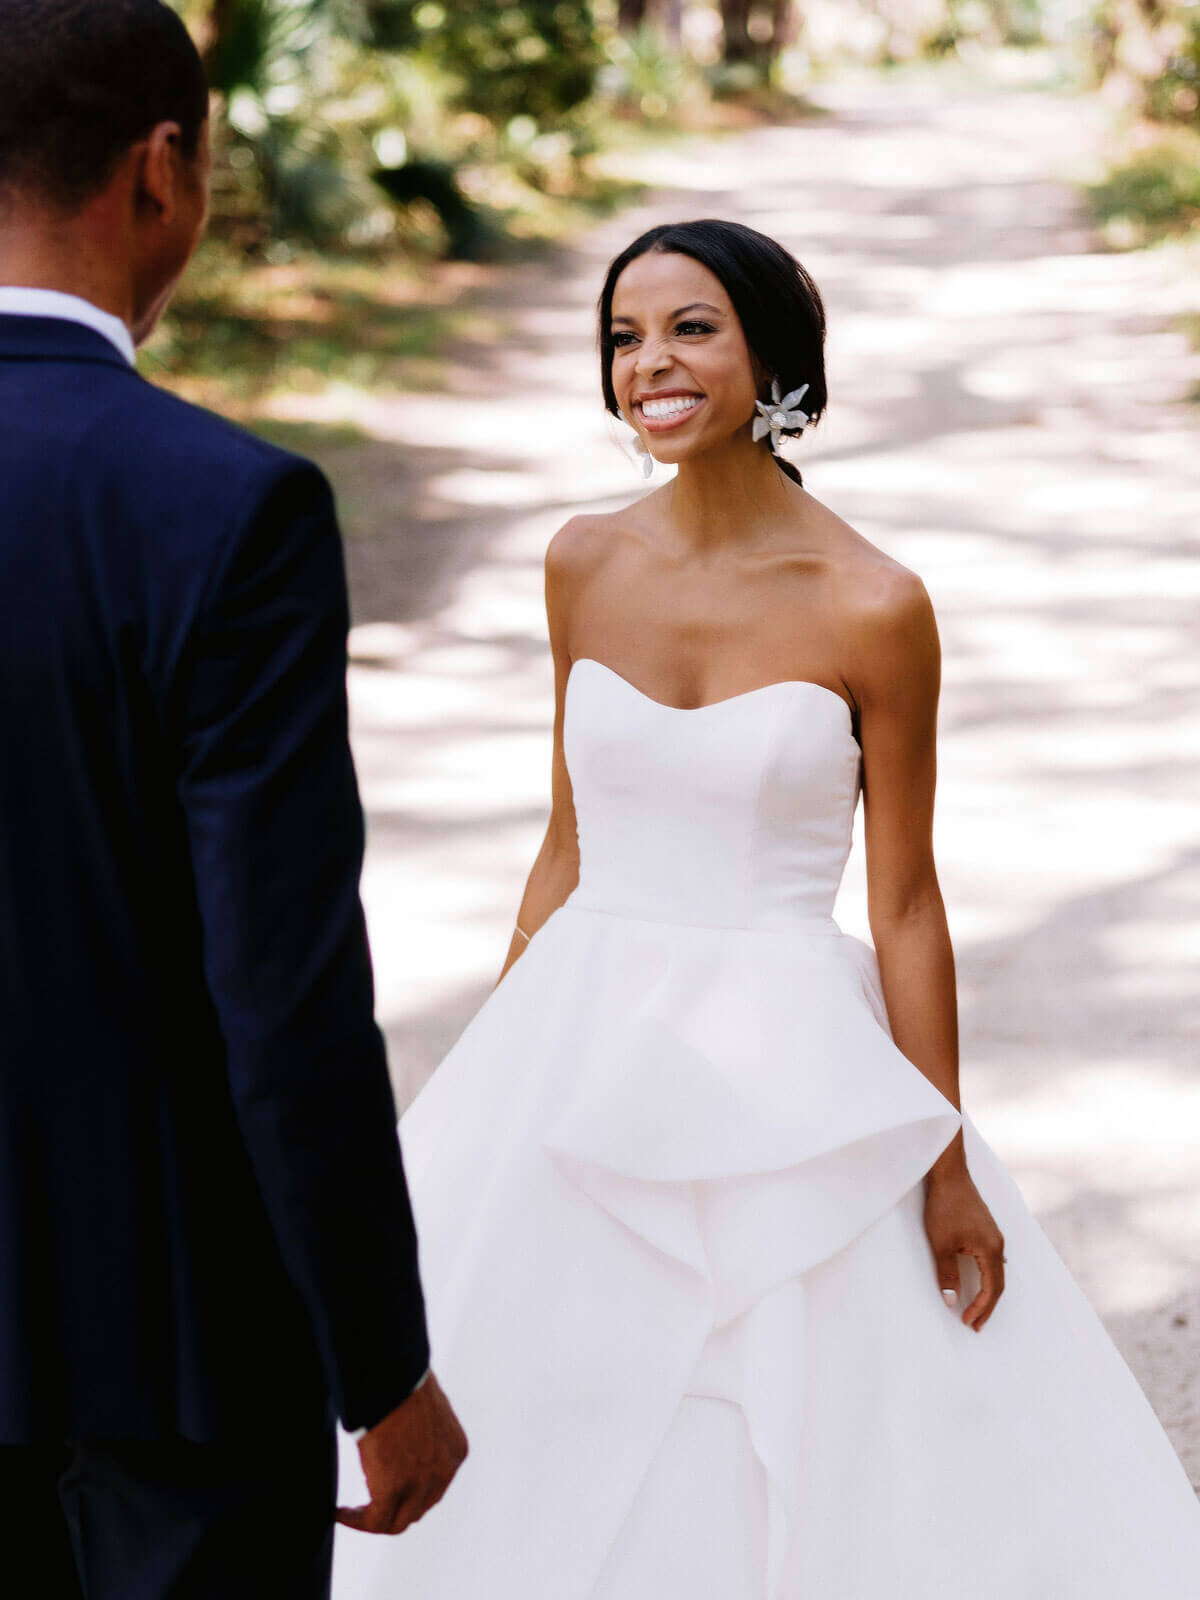 The bride is smiling broadly towards her groom in Montage at Palmetto Bluff. Destination wedding image by Jenny Fu Studio